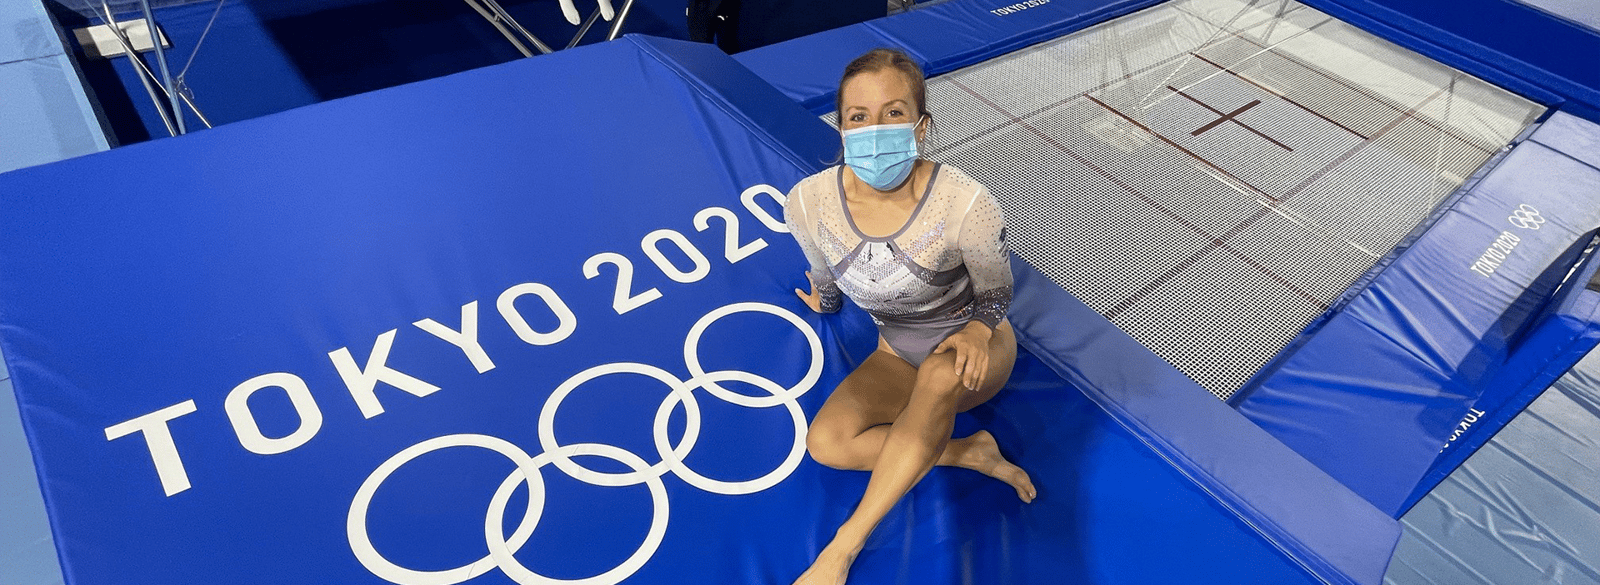 Laura Gallagher Competes in the Olympics at Tokyo 2021